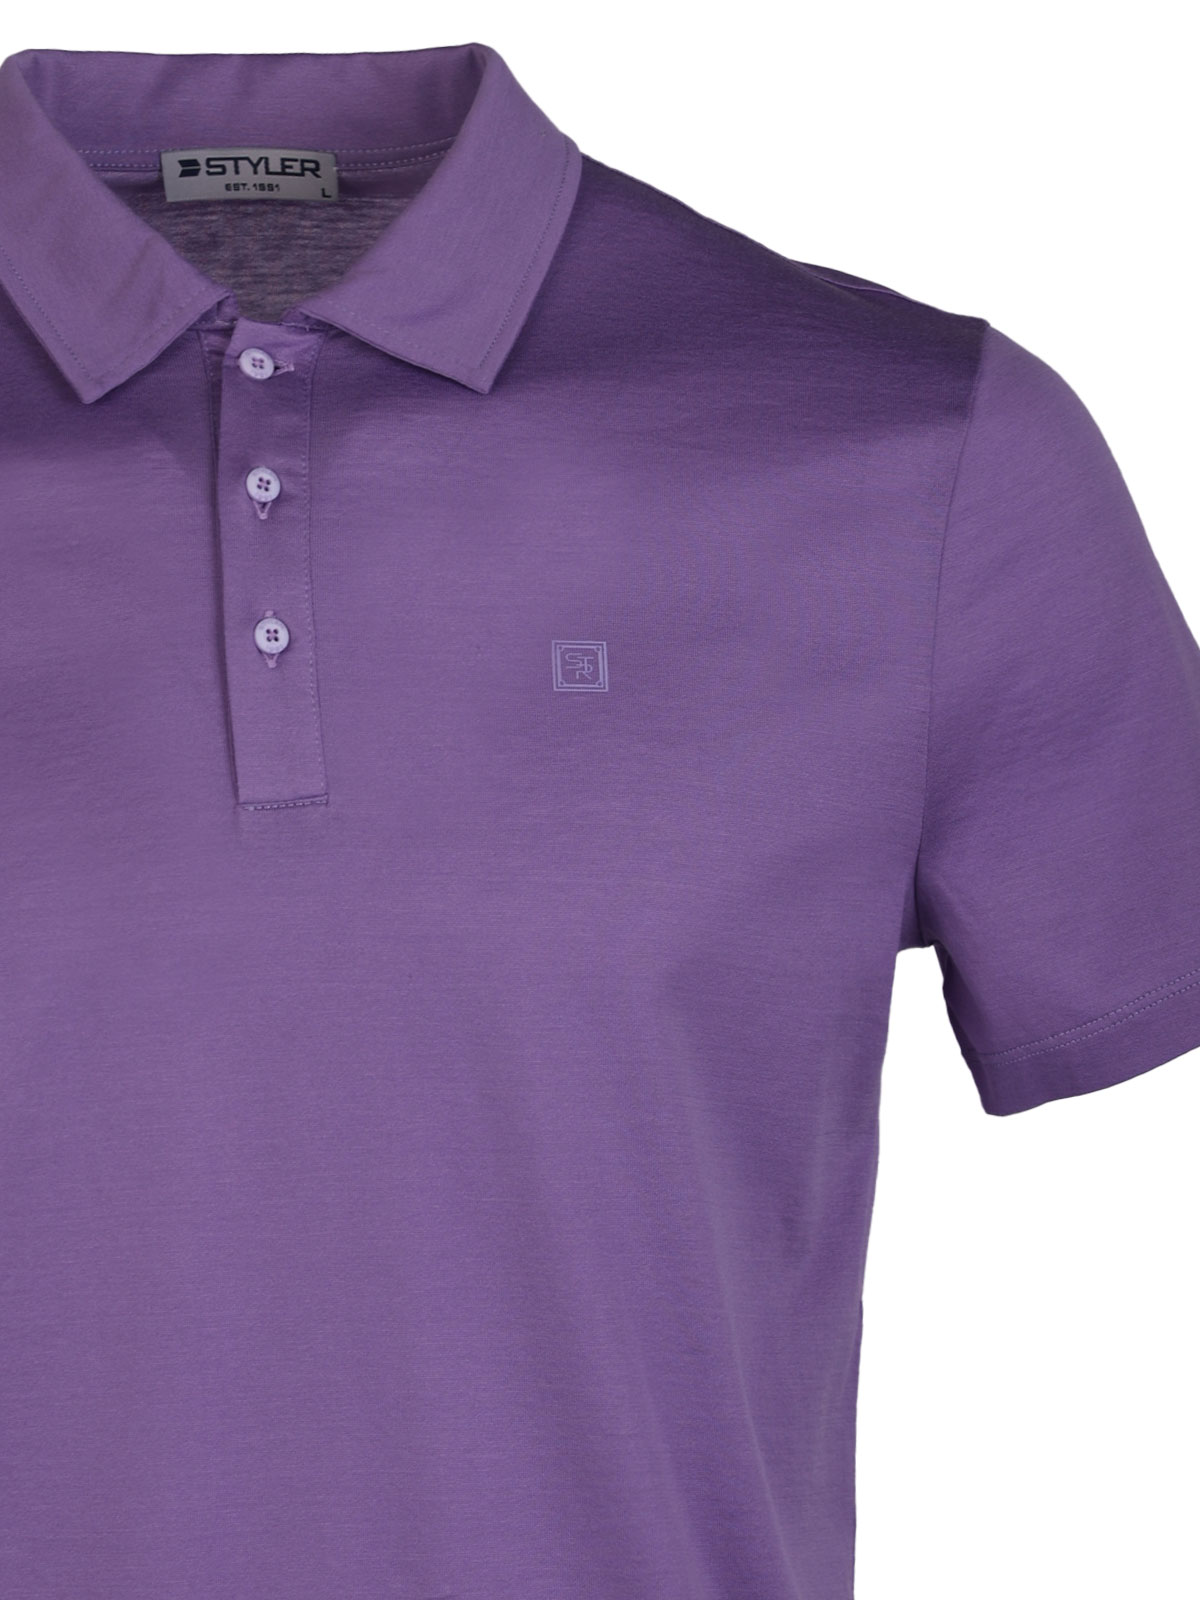 Tshirt in purple with a collar - 94419 € 33.18 img2